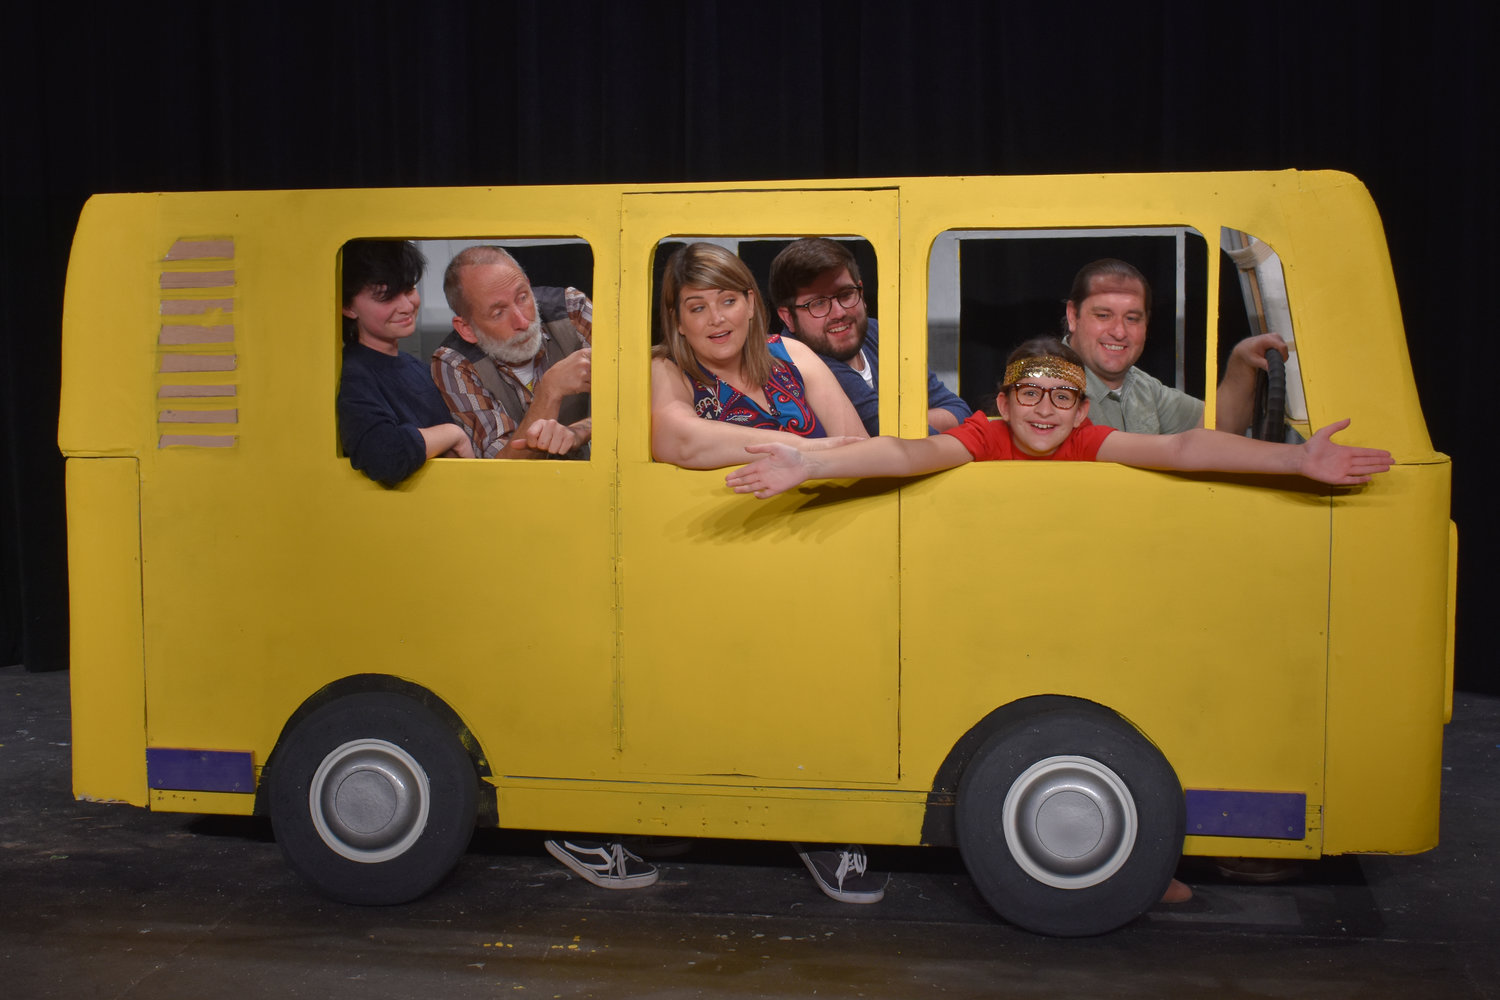 Pushing the bus in a rehearsal of Las Cruces Community Theatre’s upcoming production of “Little Miss Sunshine” are, left to right, Amanda Bradford, James Boberg, Kayla Bradford, Brandon Brown, Jason Wyatt and Hyde Brown.